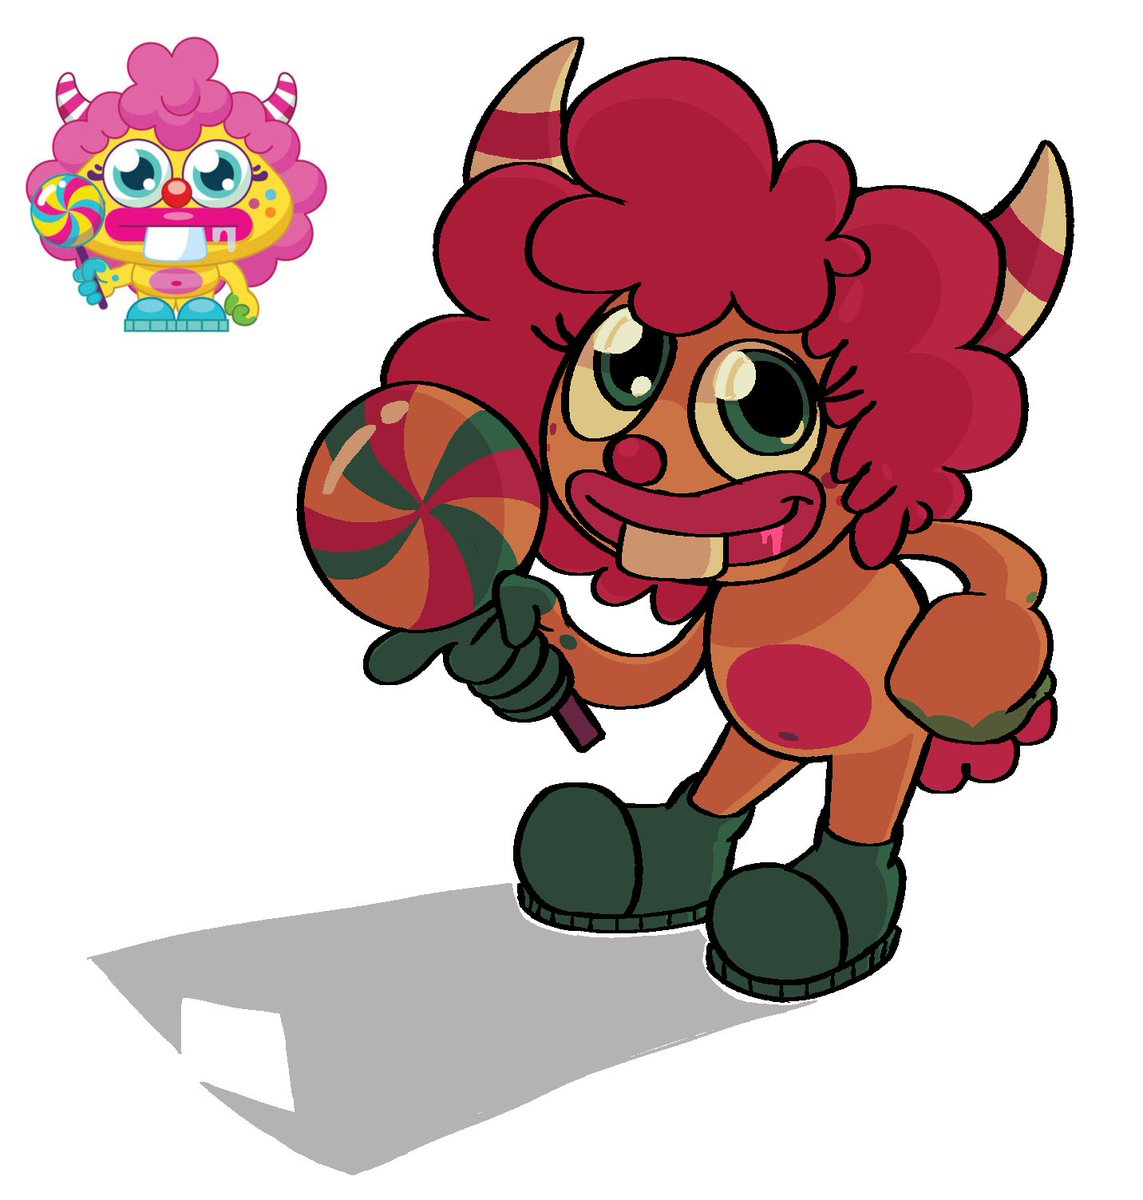 sweet tooth for @kalopop 

#moshimonsters